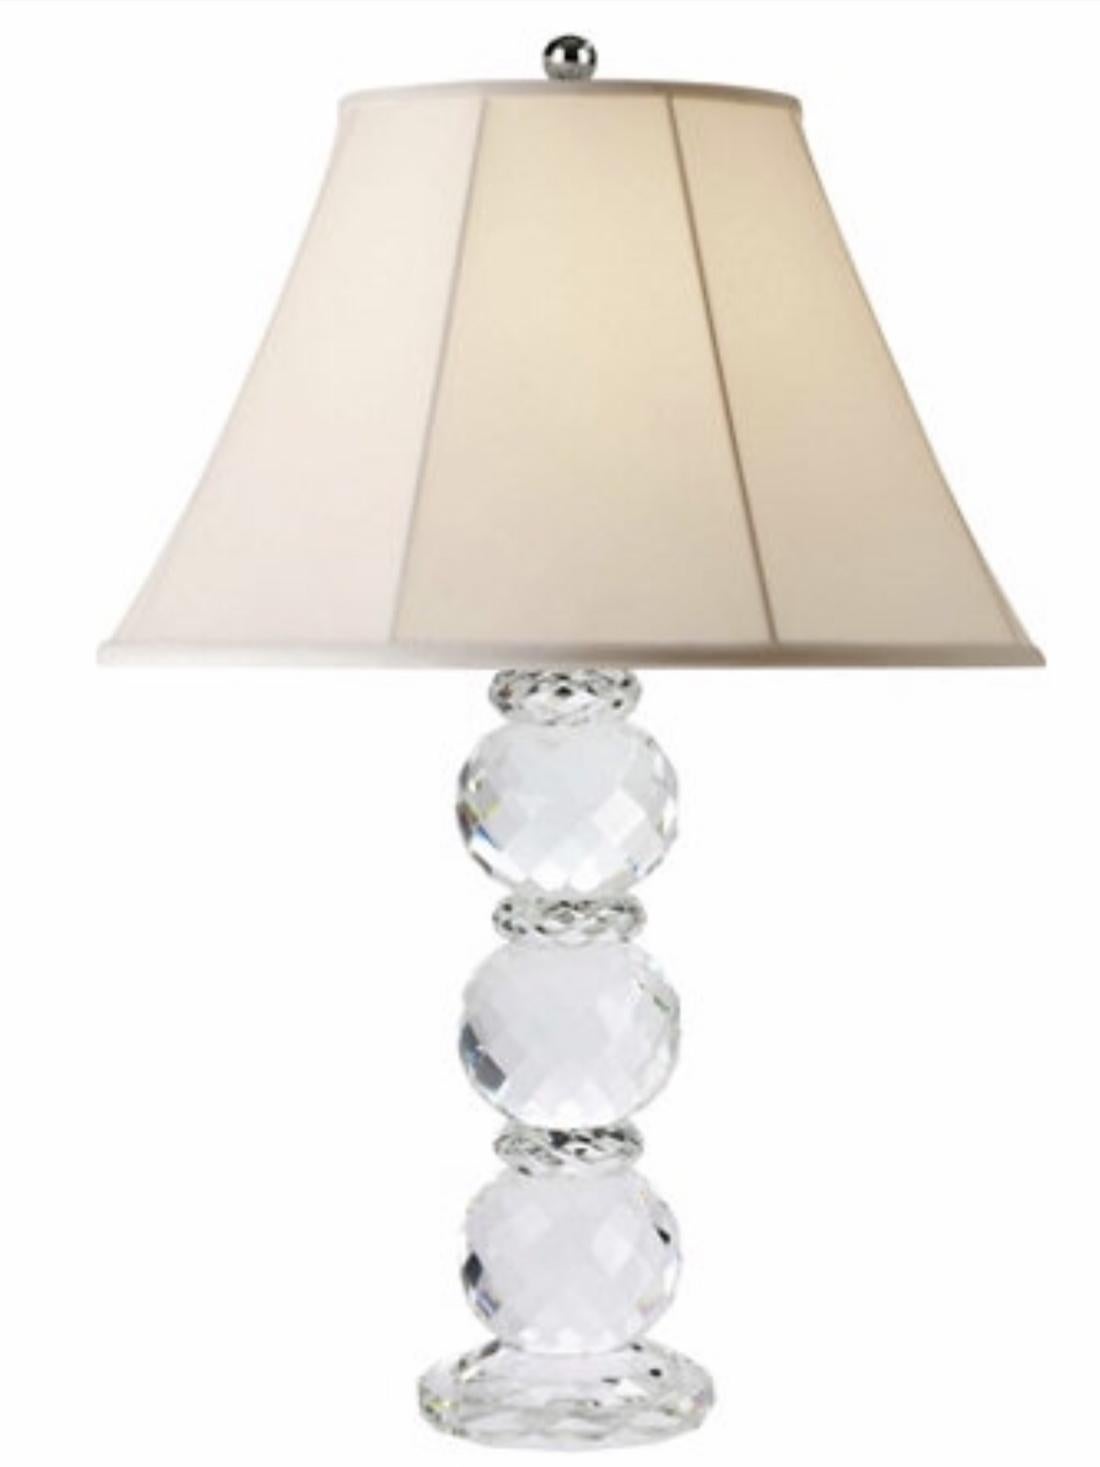 This Ralph Lauren clear crystal faceted table lamp with white silk lampshade is part of the Ralph Lauren Home collection and it is an elegant piece perfect to valorize every room of your home.
We're authorized dealer for Ralph Lauren Home
EU or USA